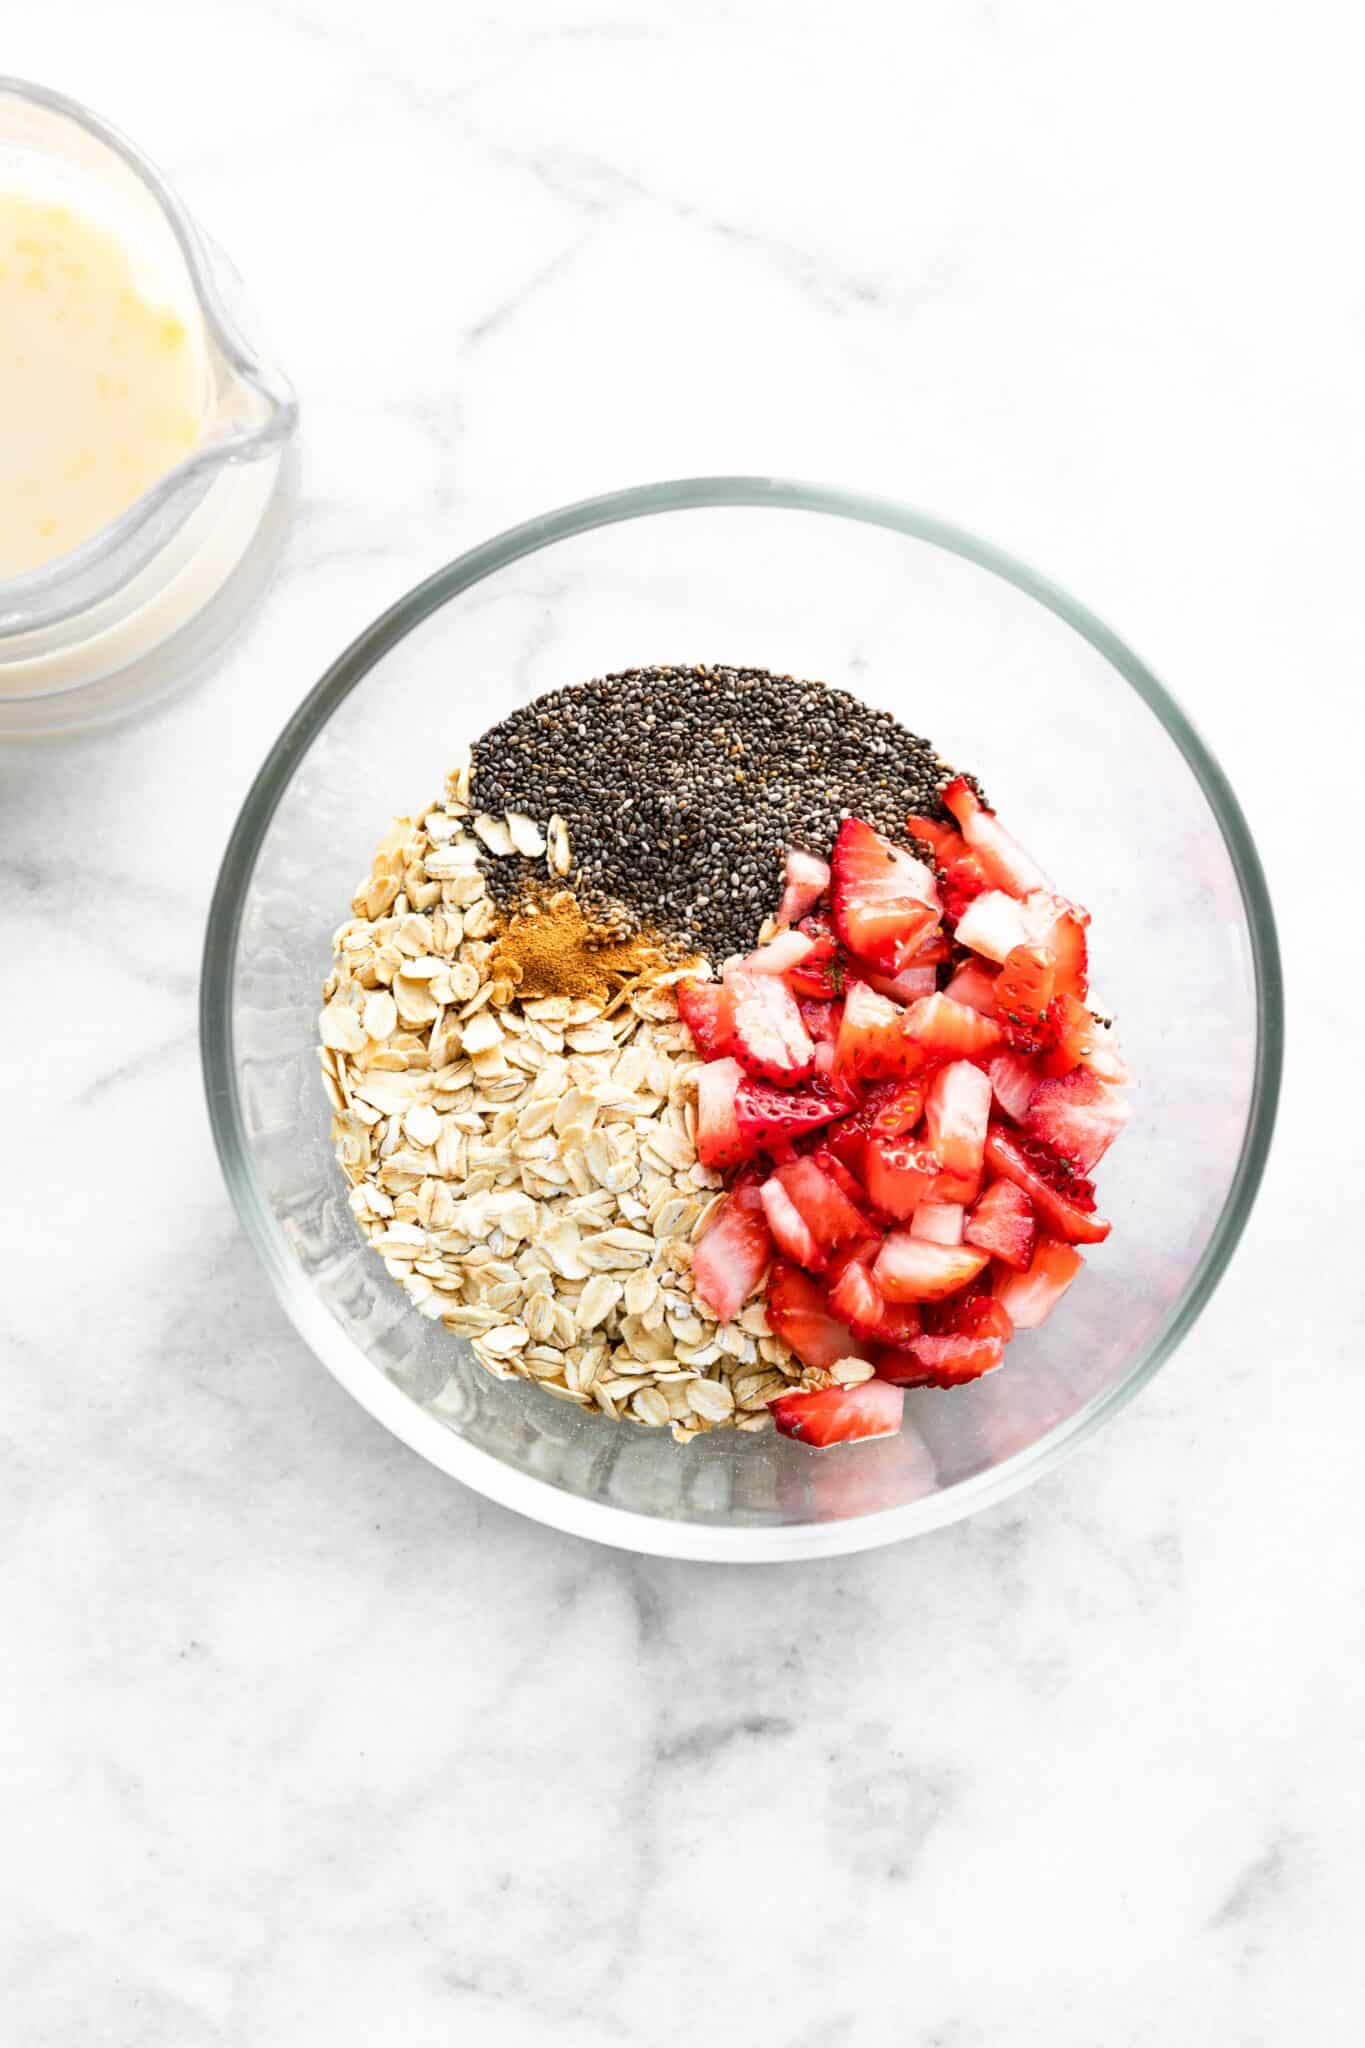 Overhead photo of chia seeds, rolled oats, strawberries and cinnamon in a bowl.